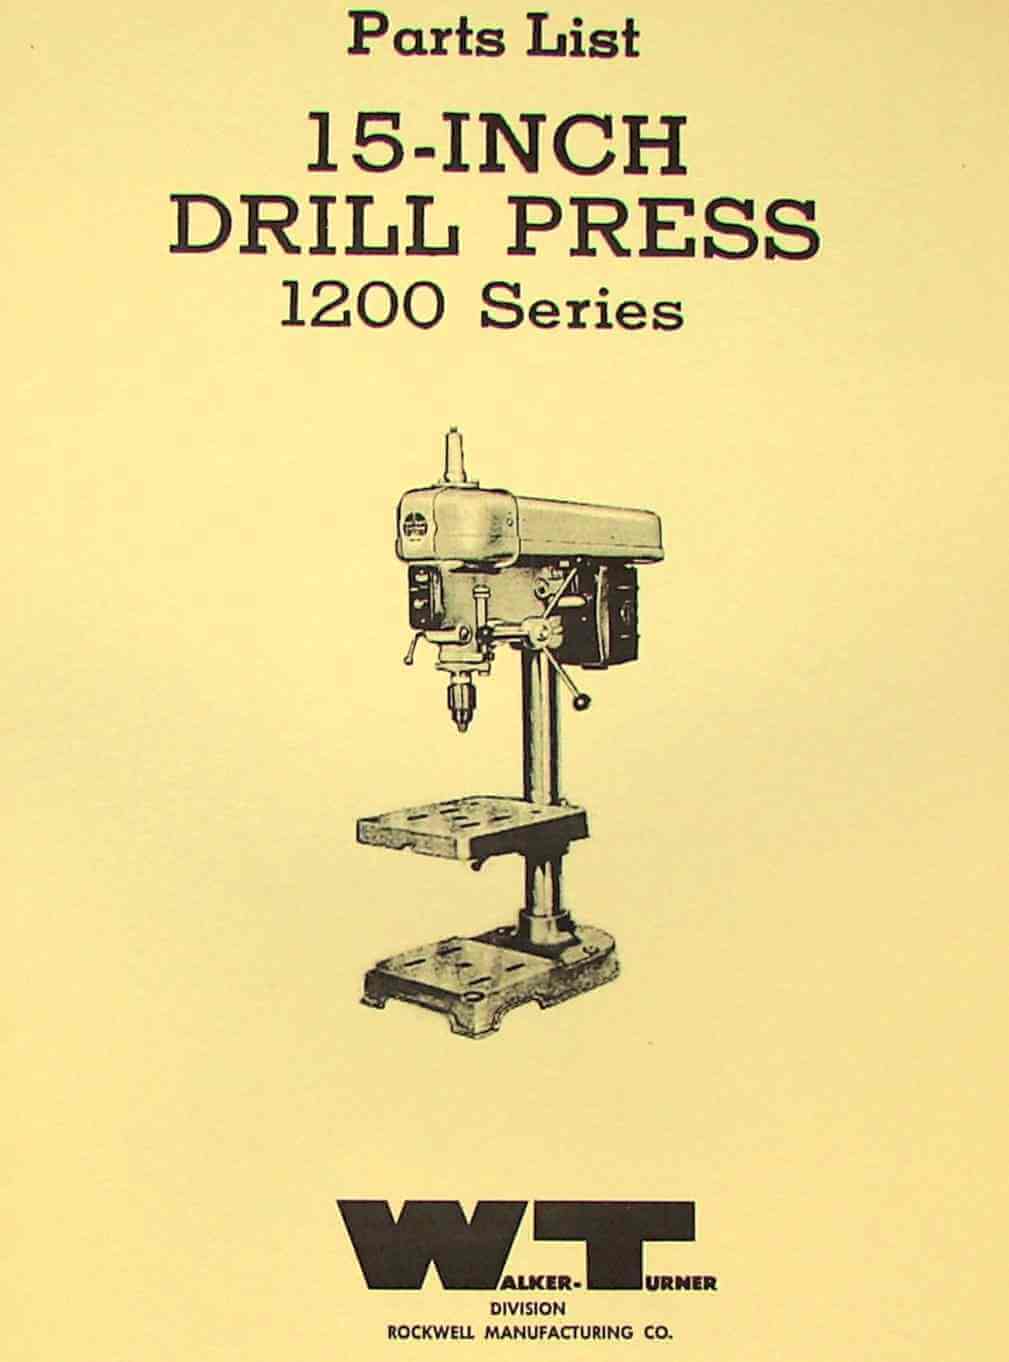 Product Spec Sheet Details about   WALKER TURNER 1200 Series 15 Inch Drill Presses 